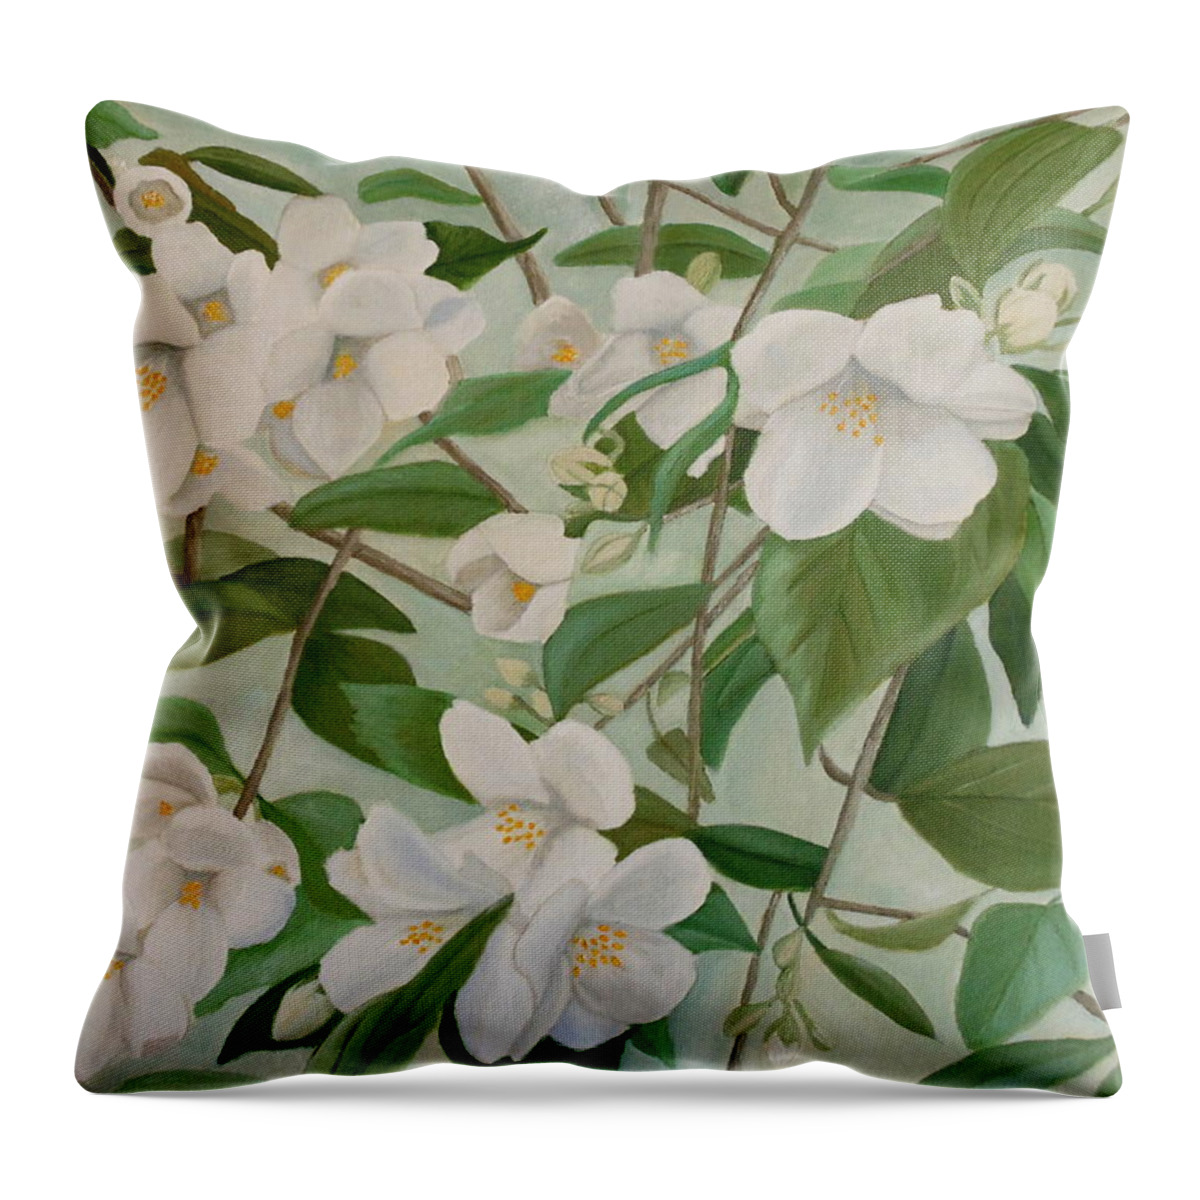 Orange Blossoms Throw Pillow featuring the painting Orange Blossoms by Angeles M Pomata